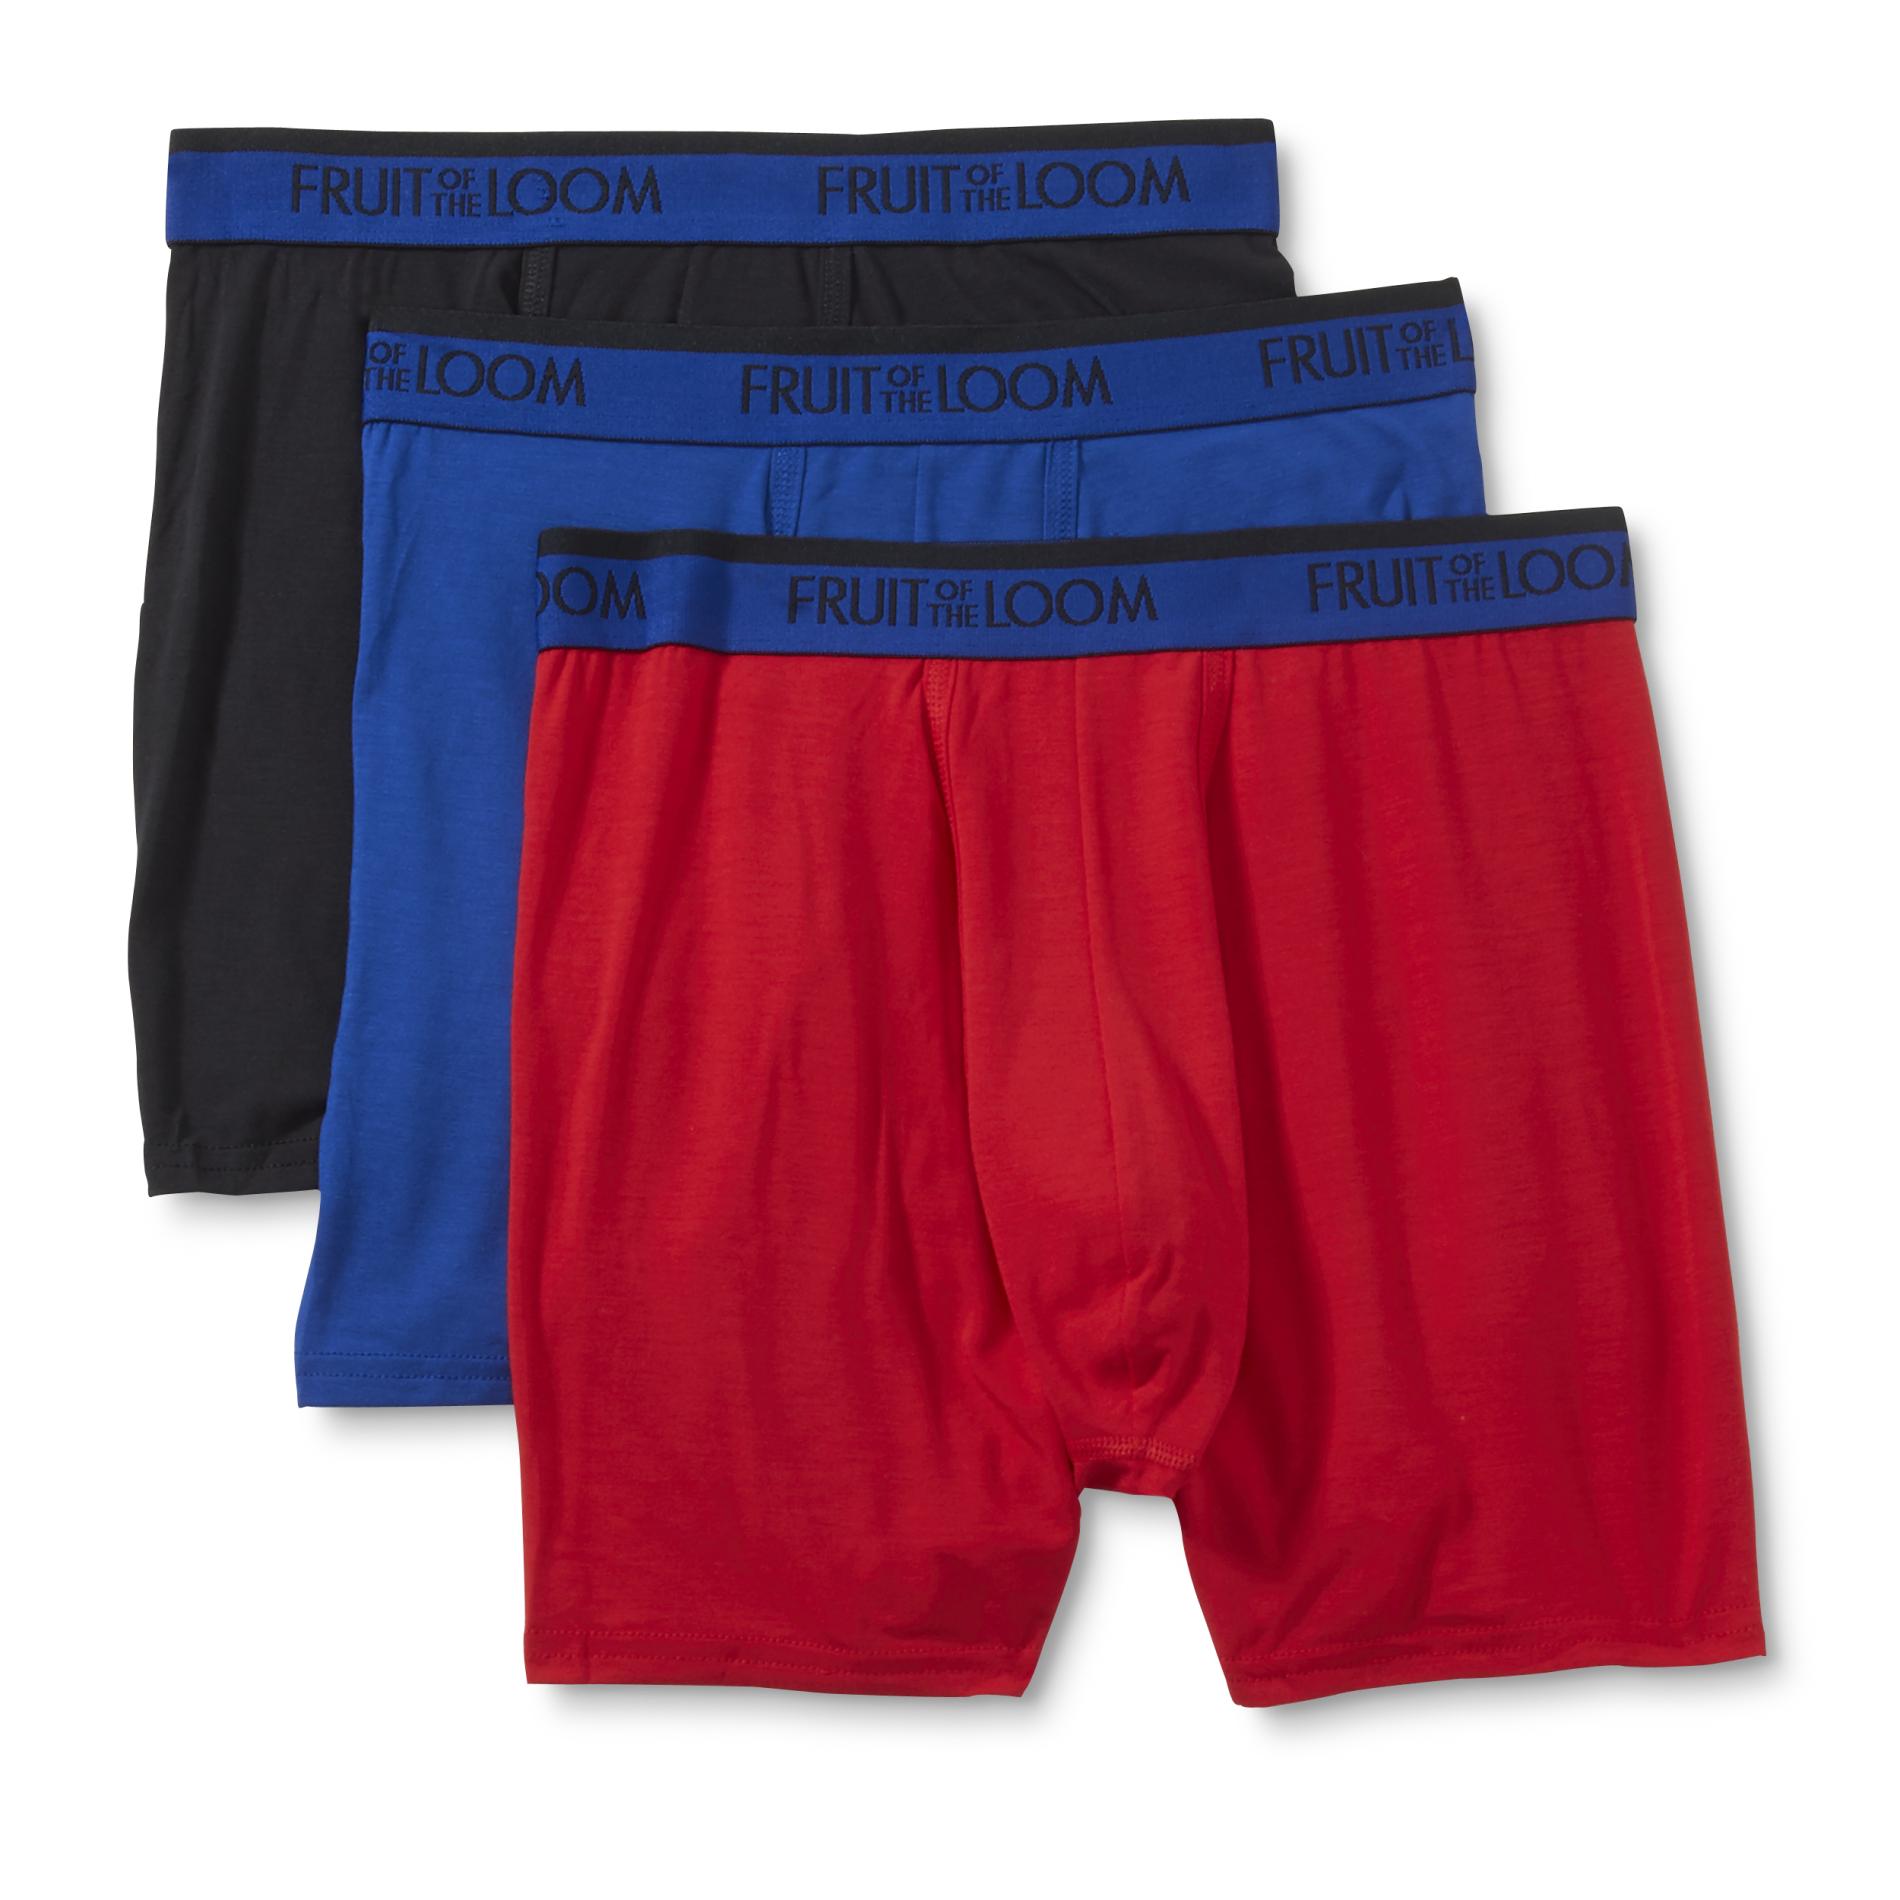 Fruit of the Loom Men’s 3-Pack Assorted Boxer Briefs